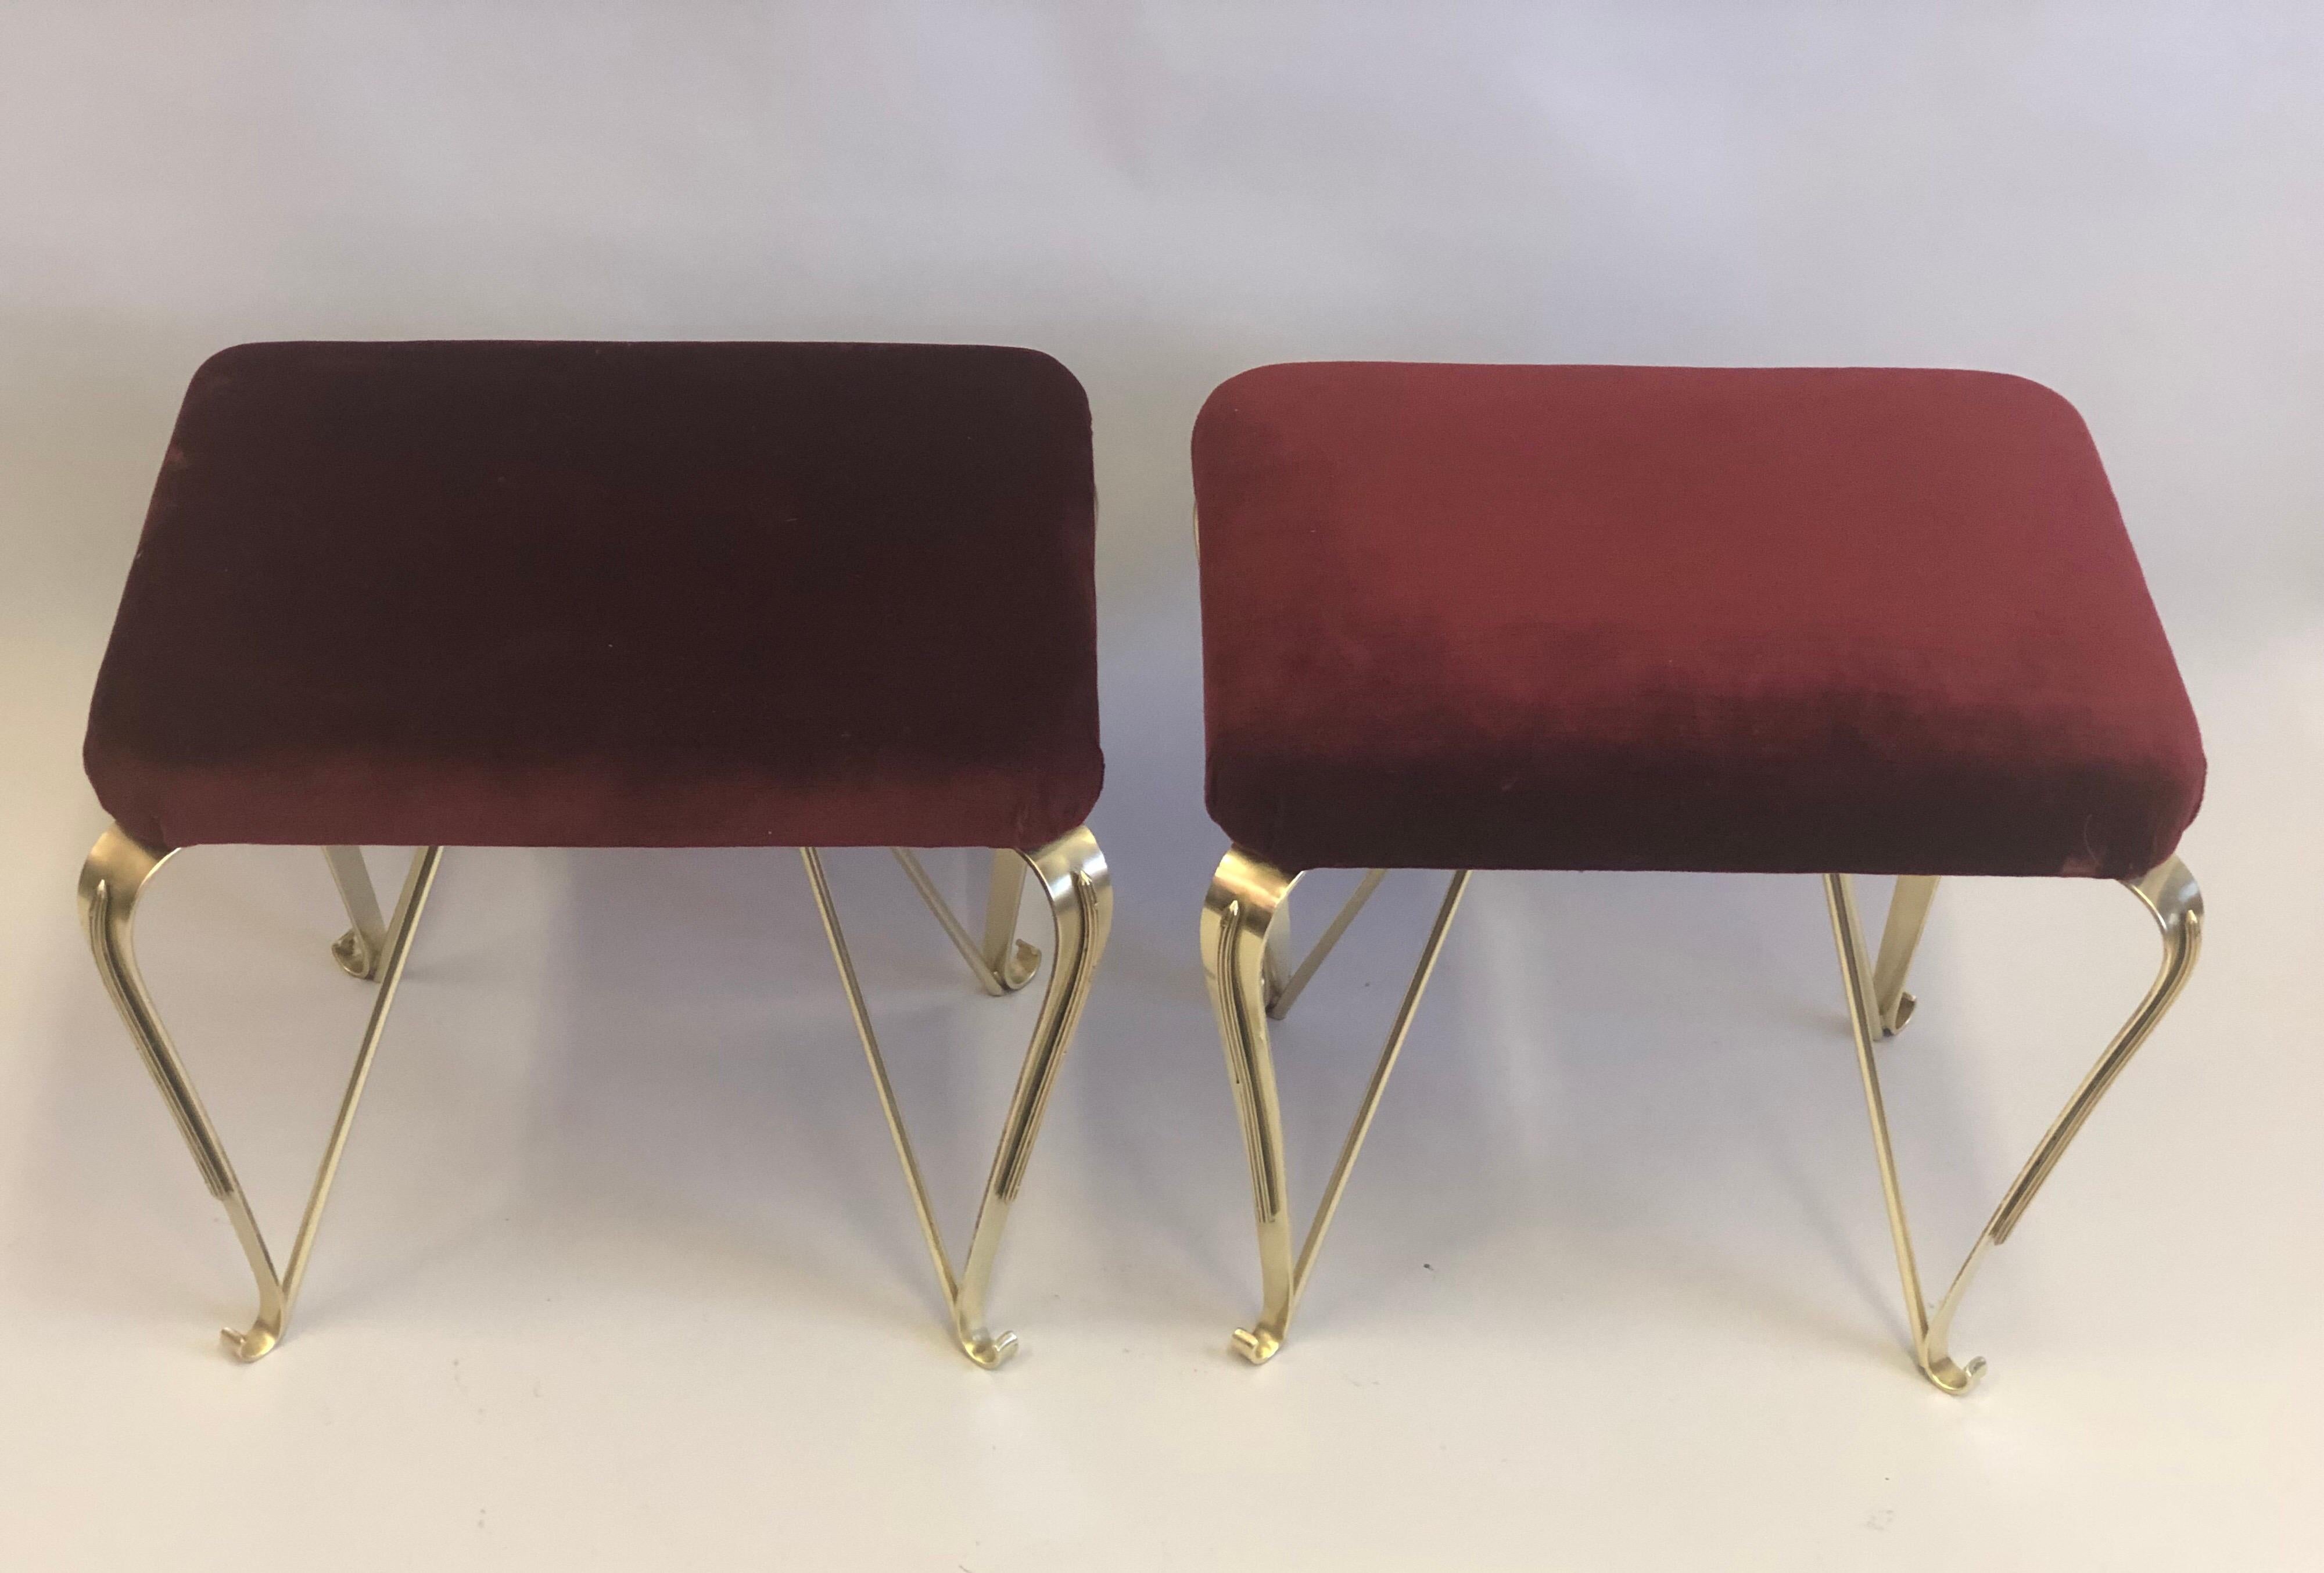 Pair of Italian Mid-Century Modern Neoclassical Solid Brass Benches by Jansen For Sale 1